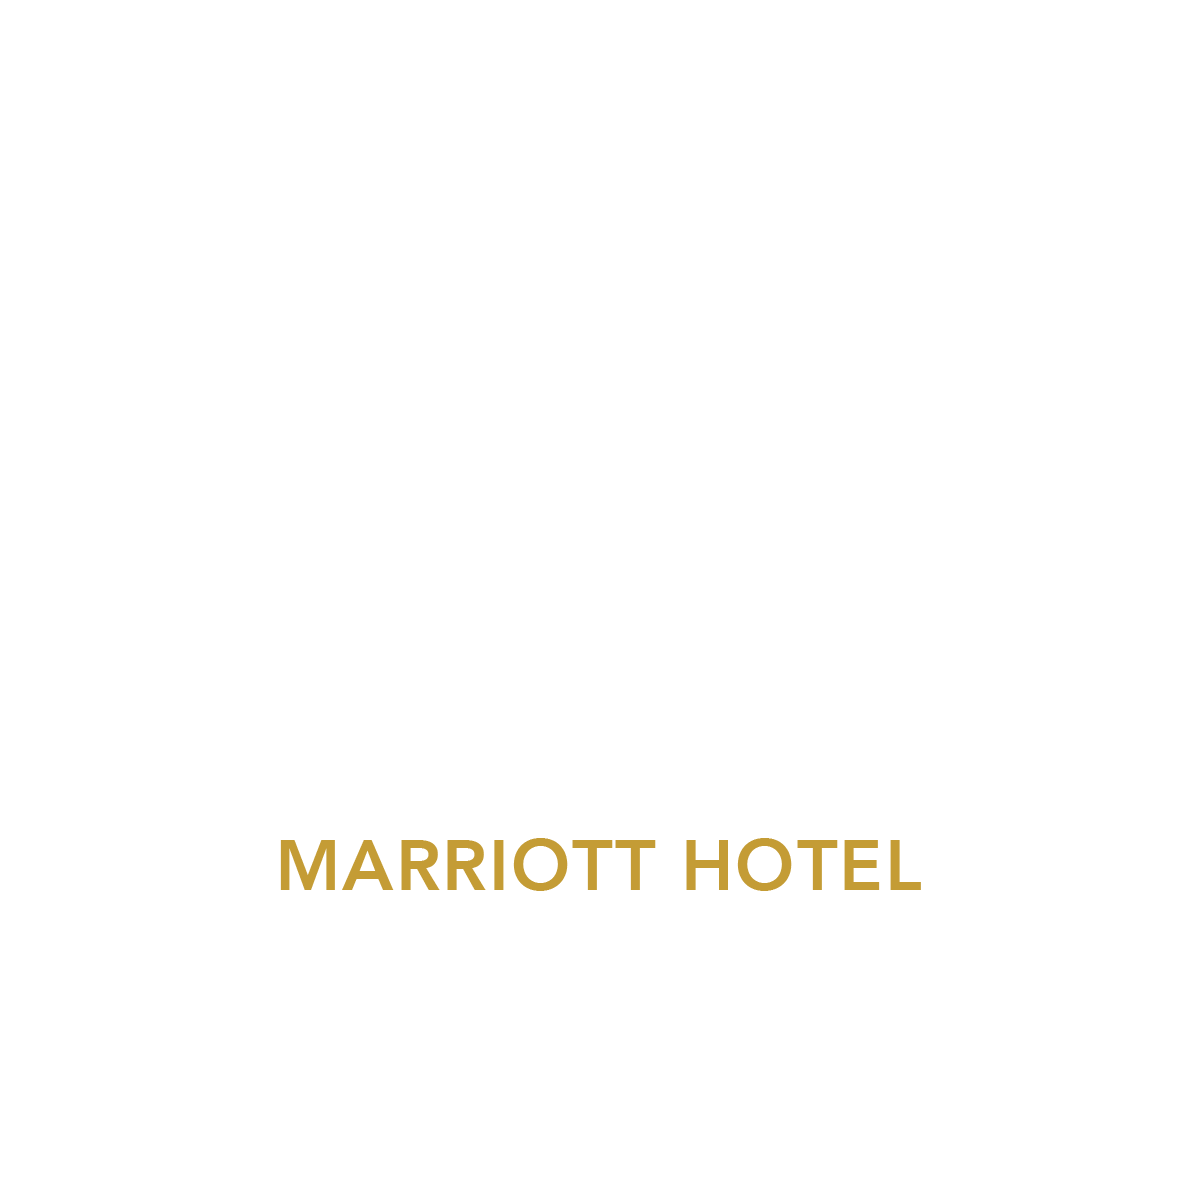 Two night stay at a hotel